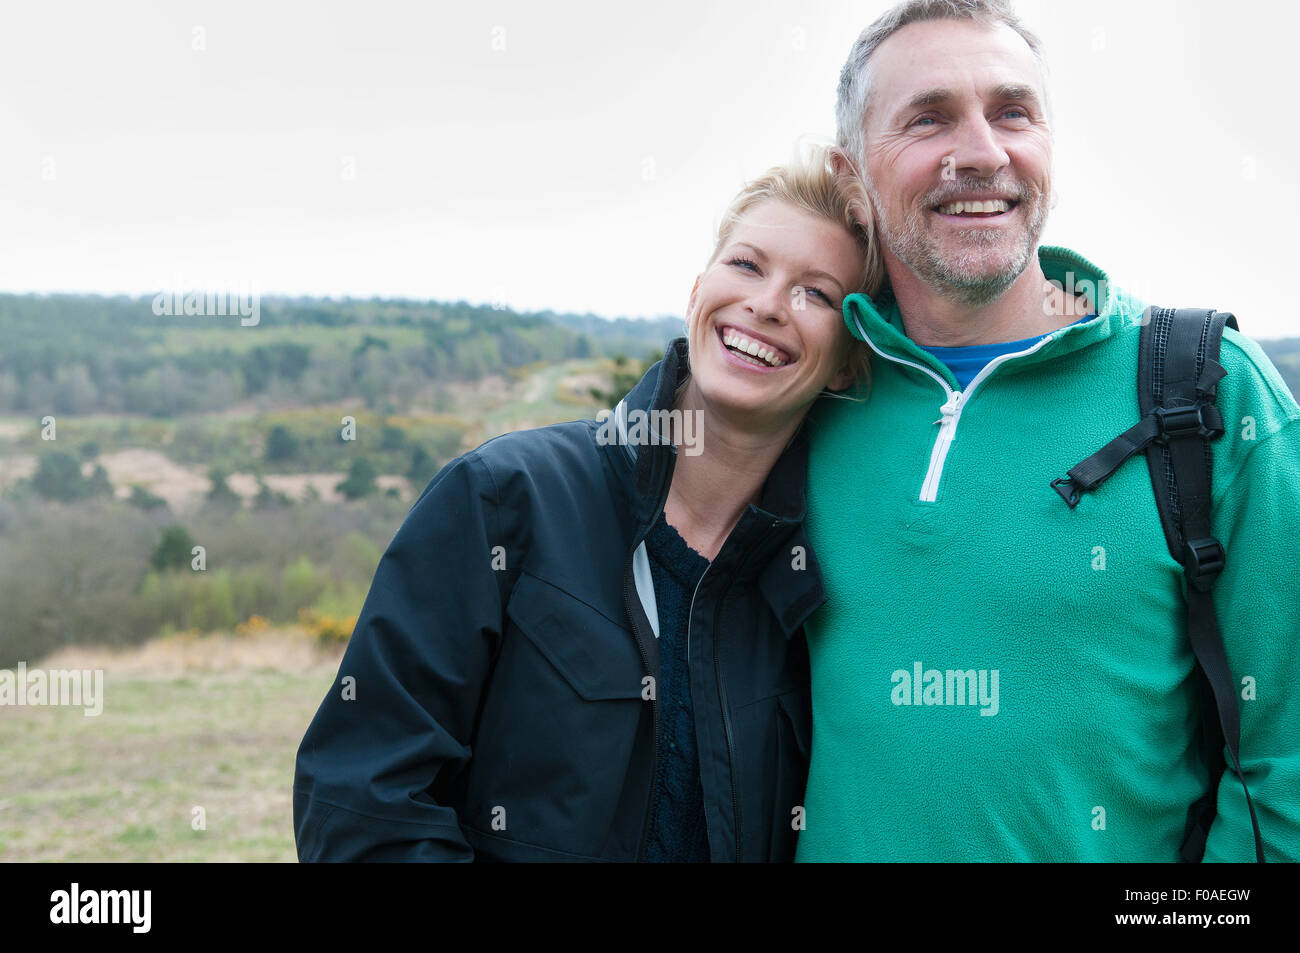 Hiking couple in rural landscape Stock Photo